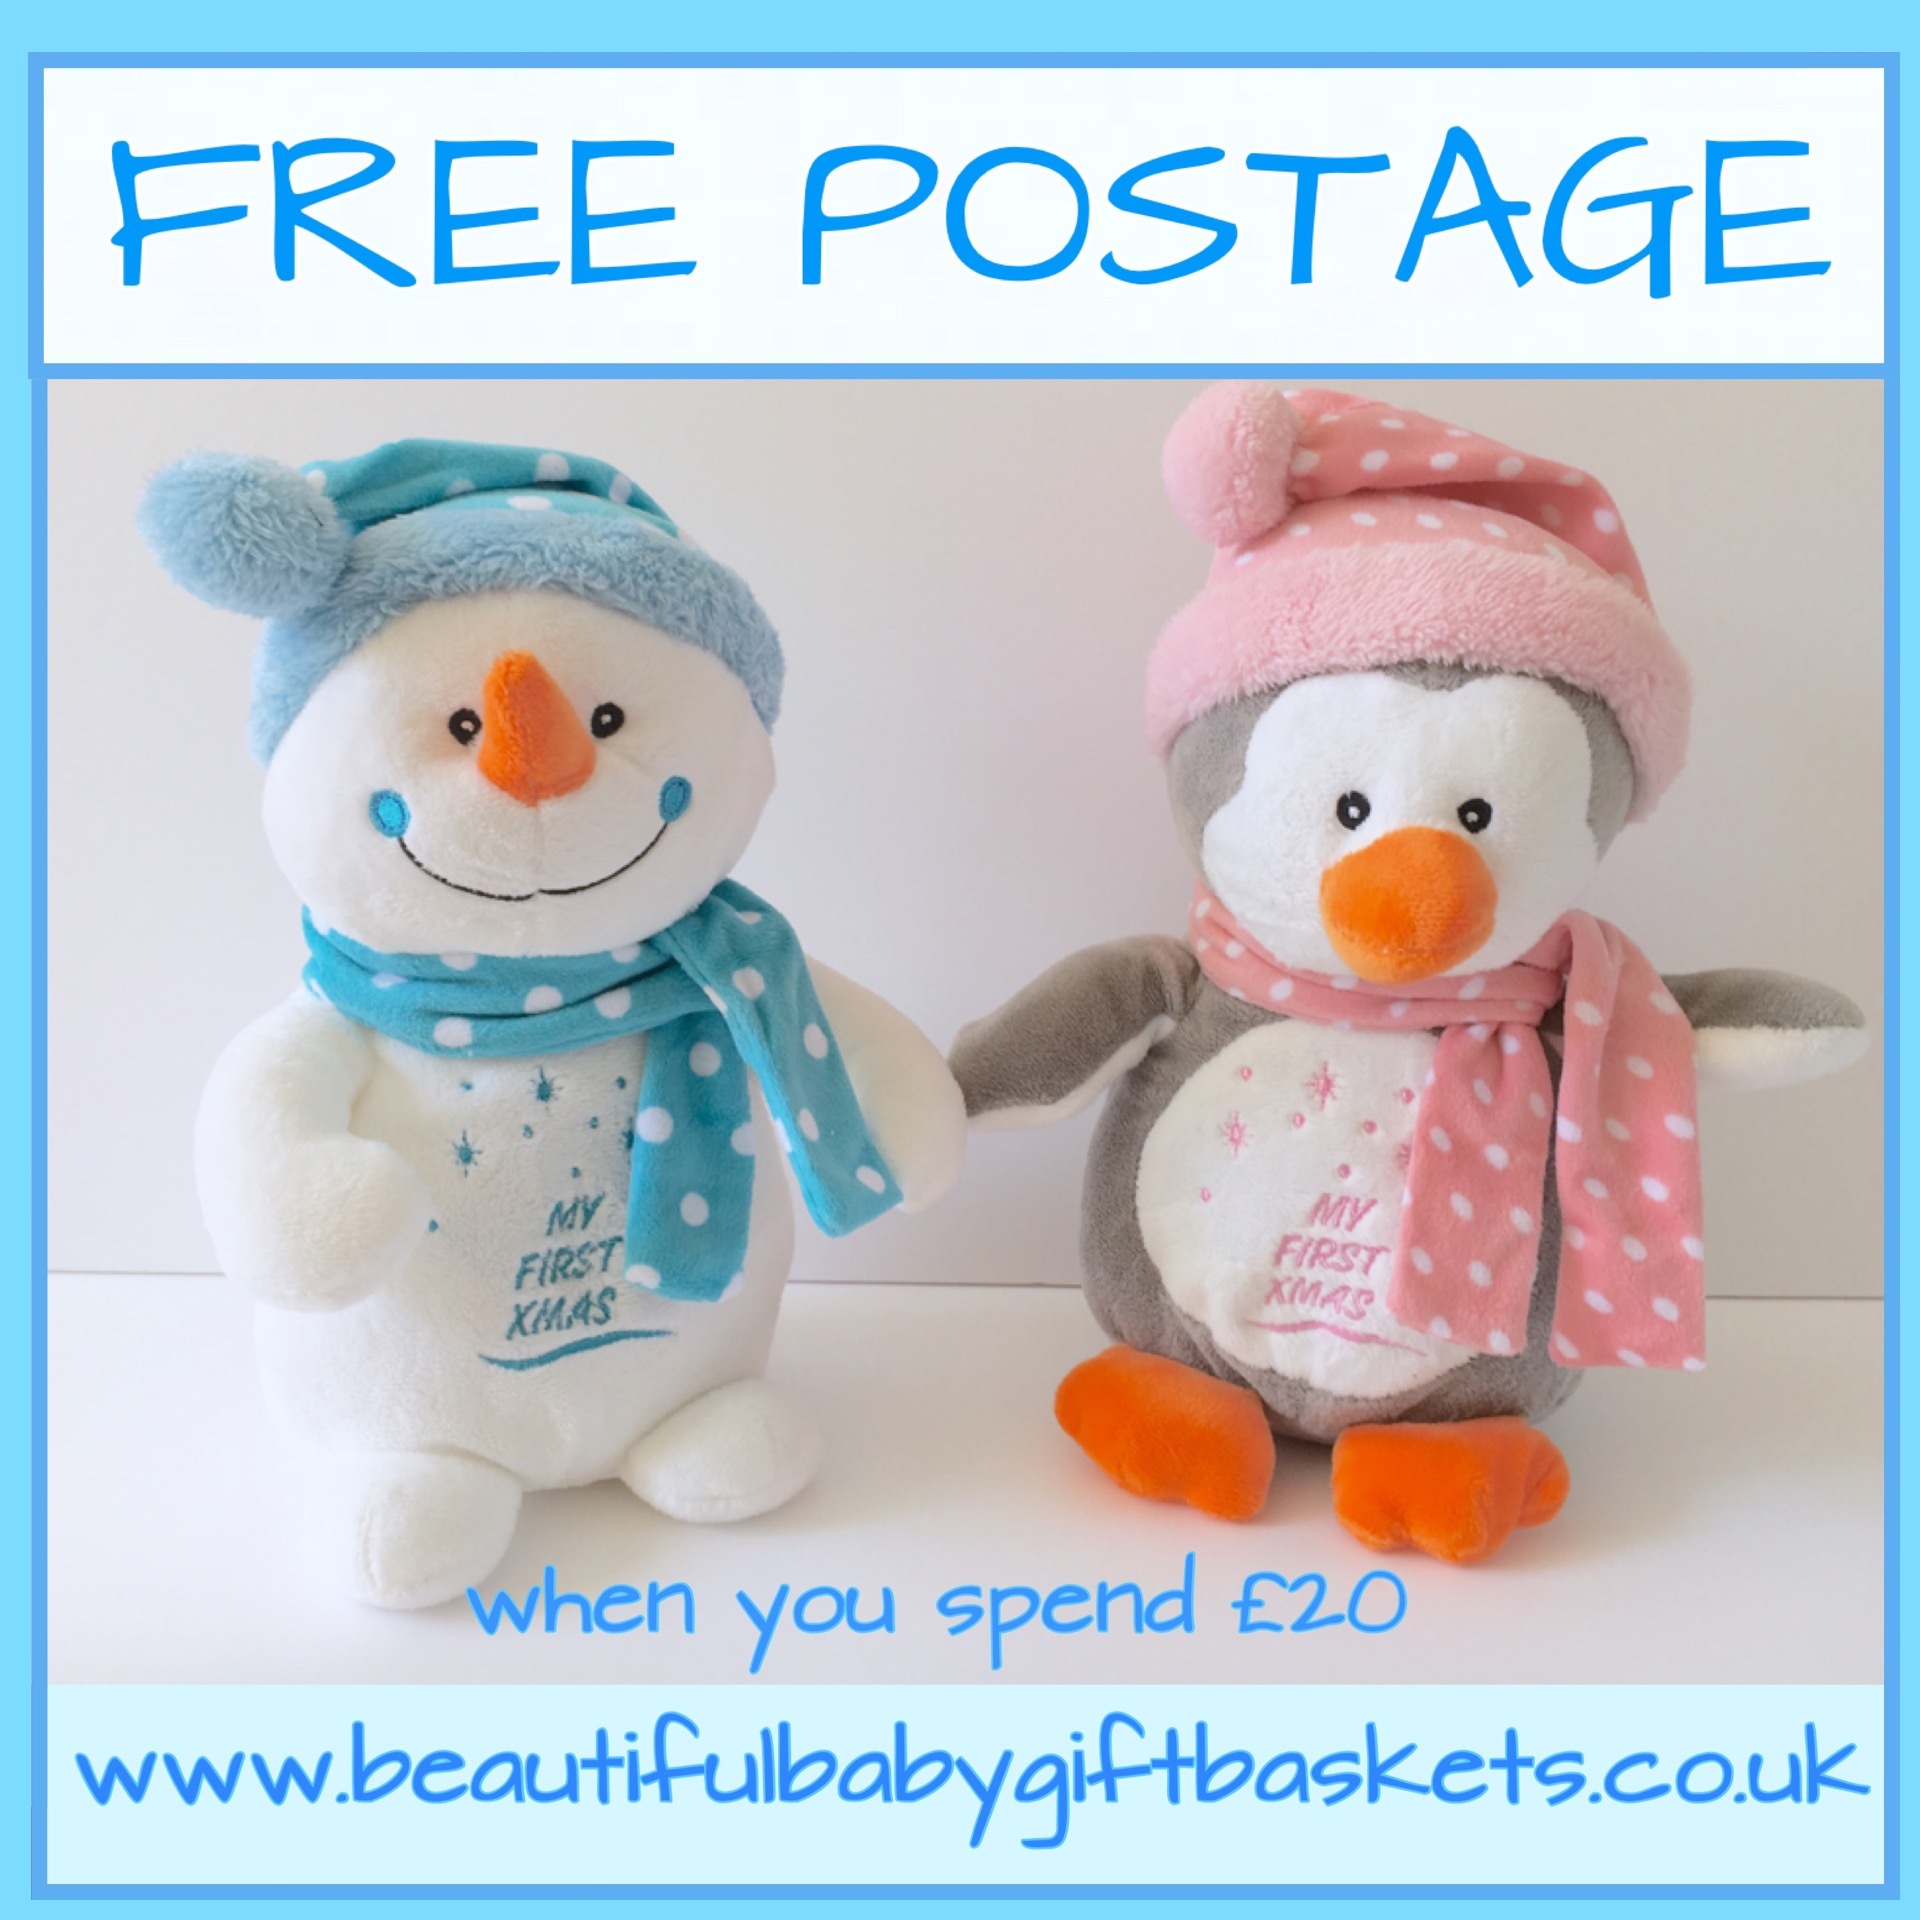 Free postage on all baby gifts & accessories